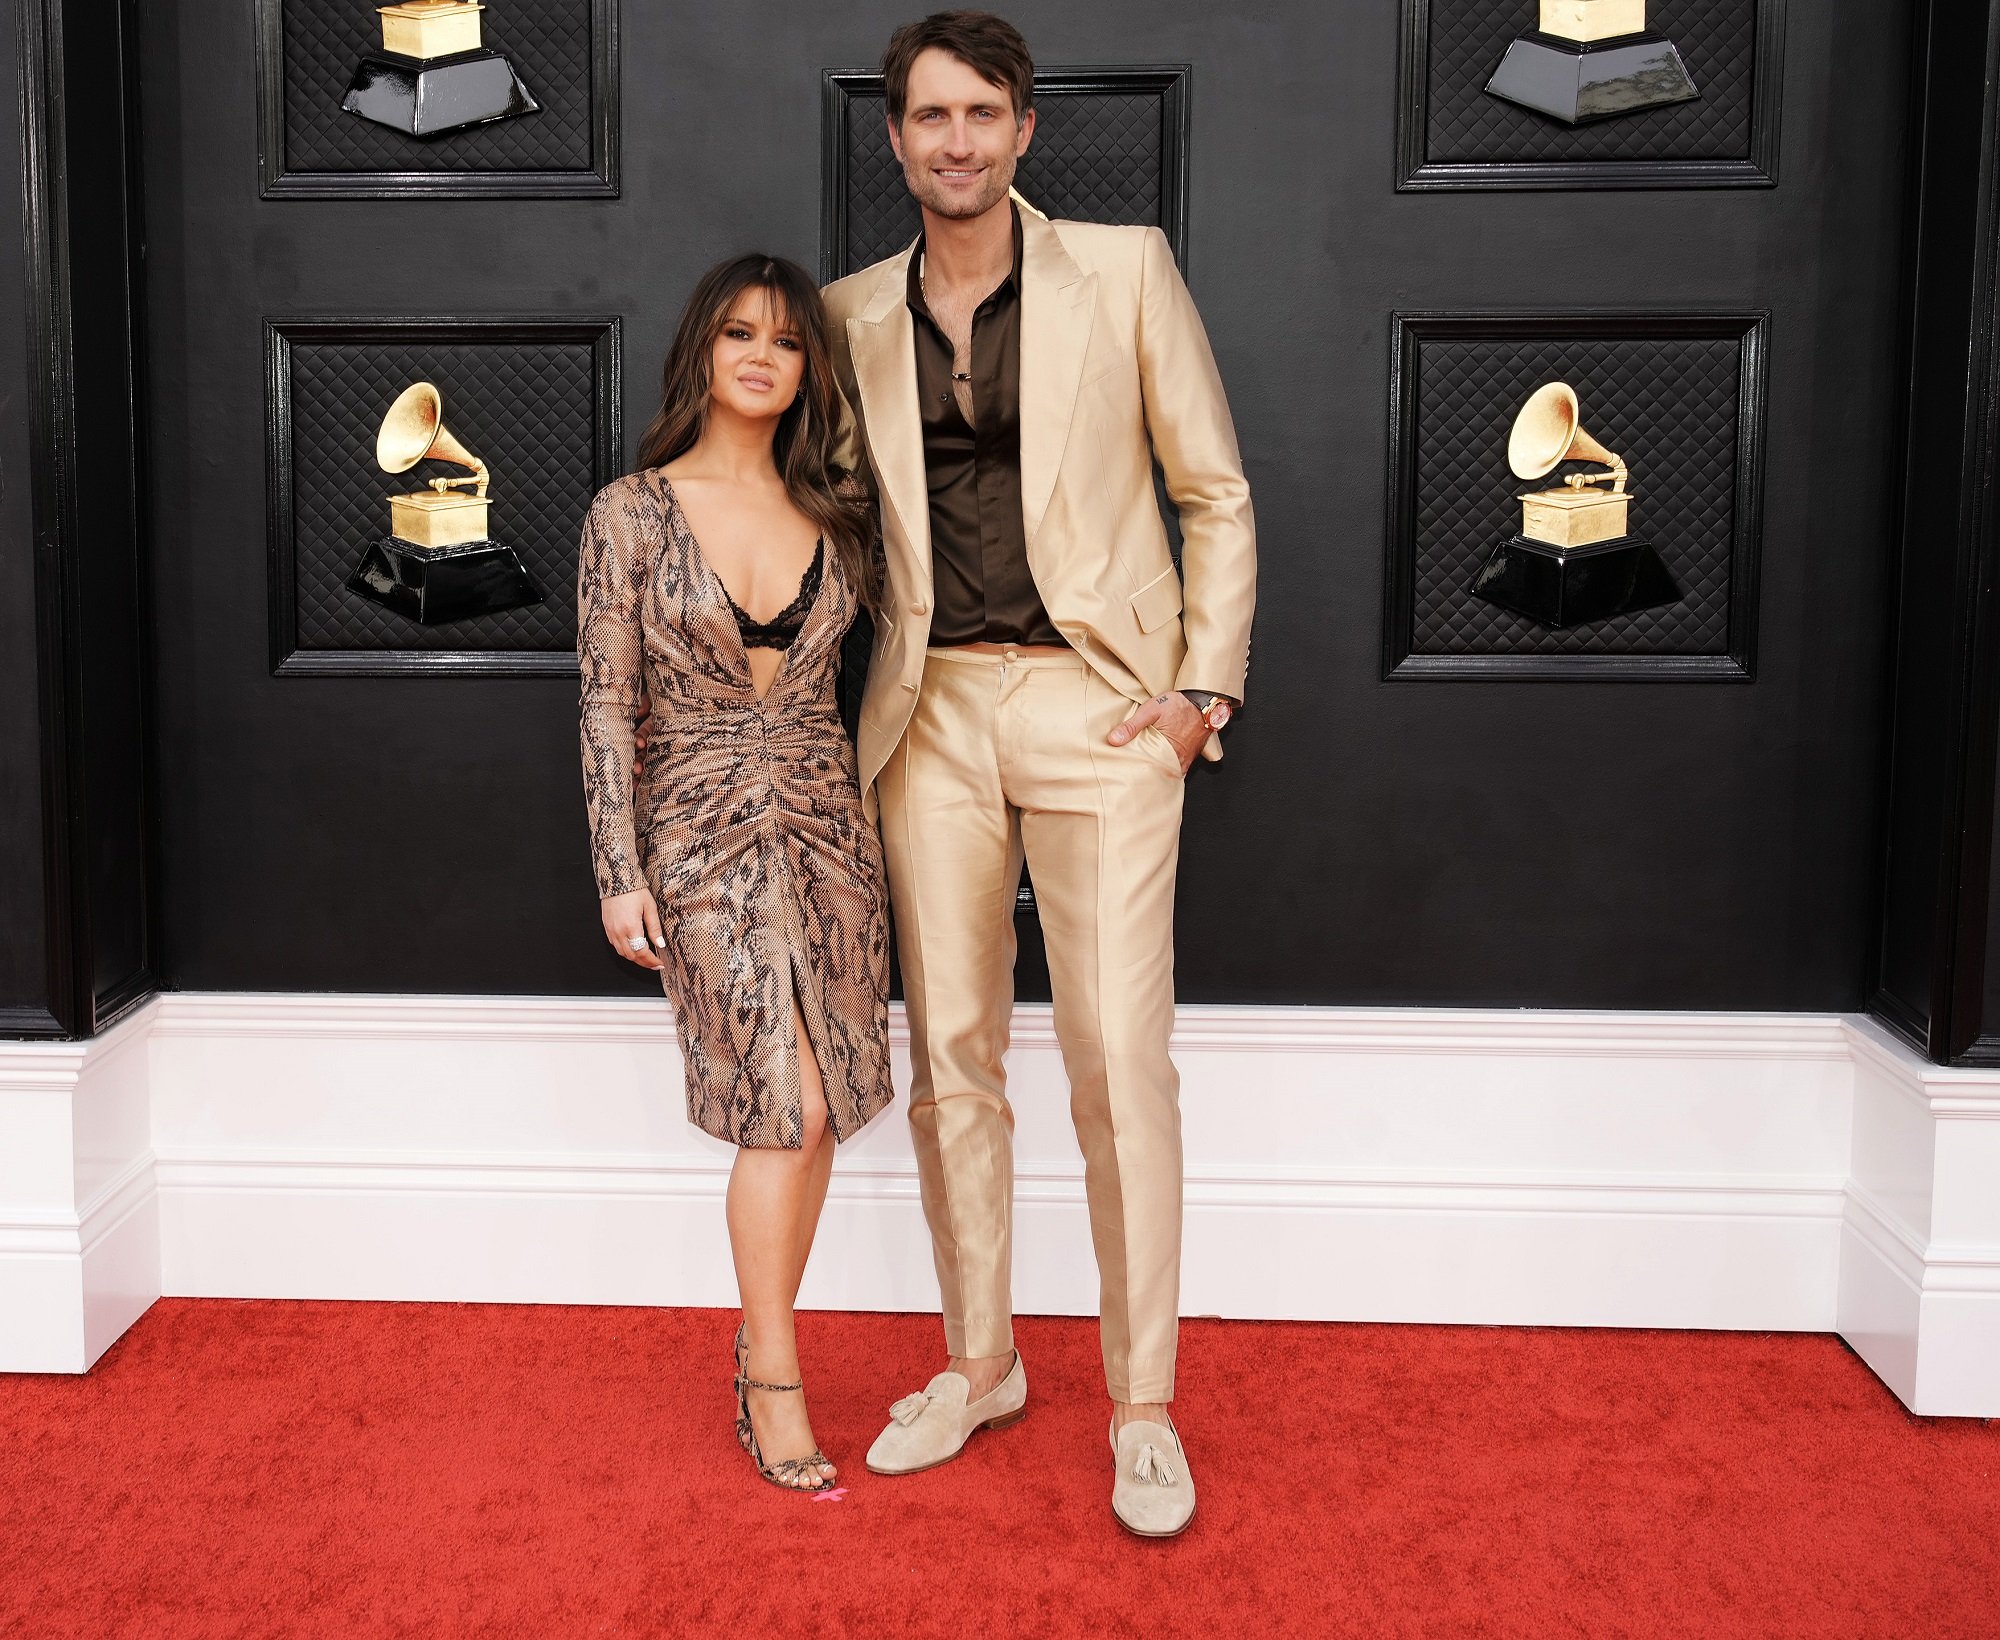 Maren Morris and Ryan Hurd attend the 64th Annual Grammy Awards